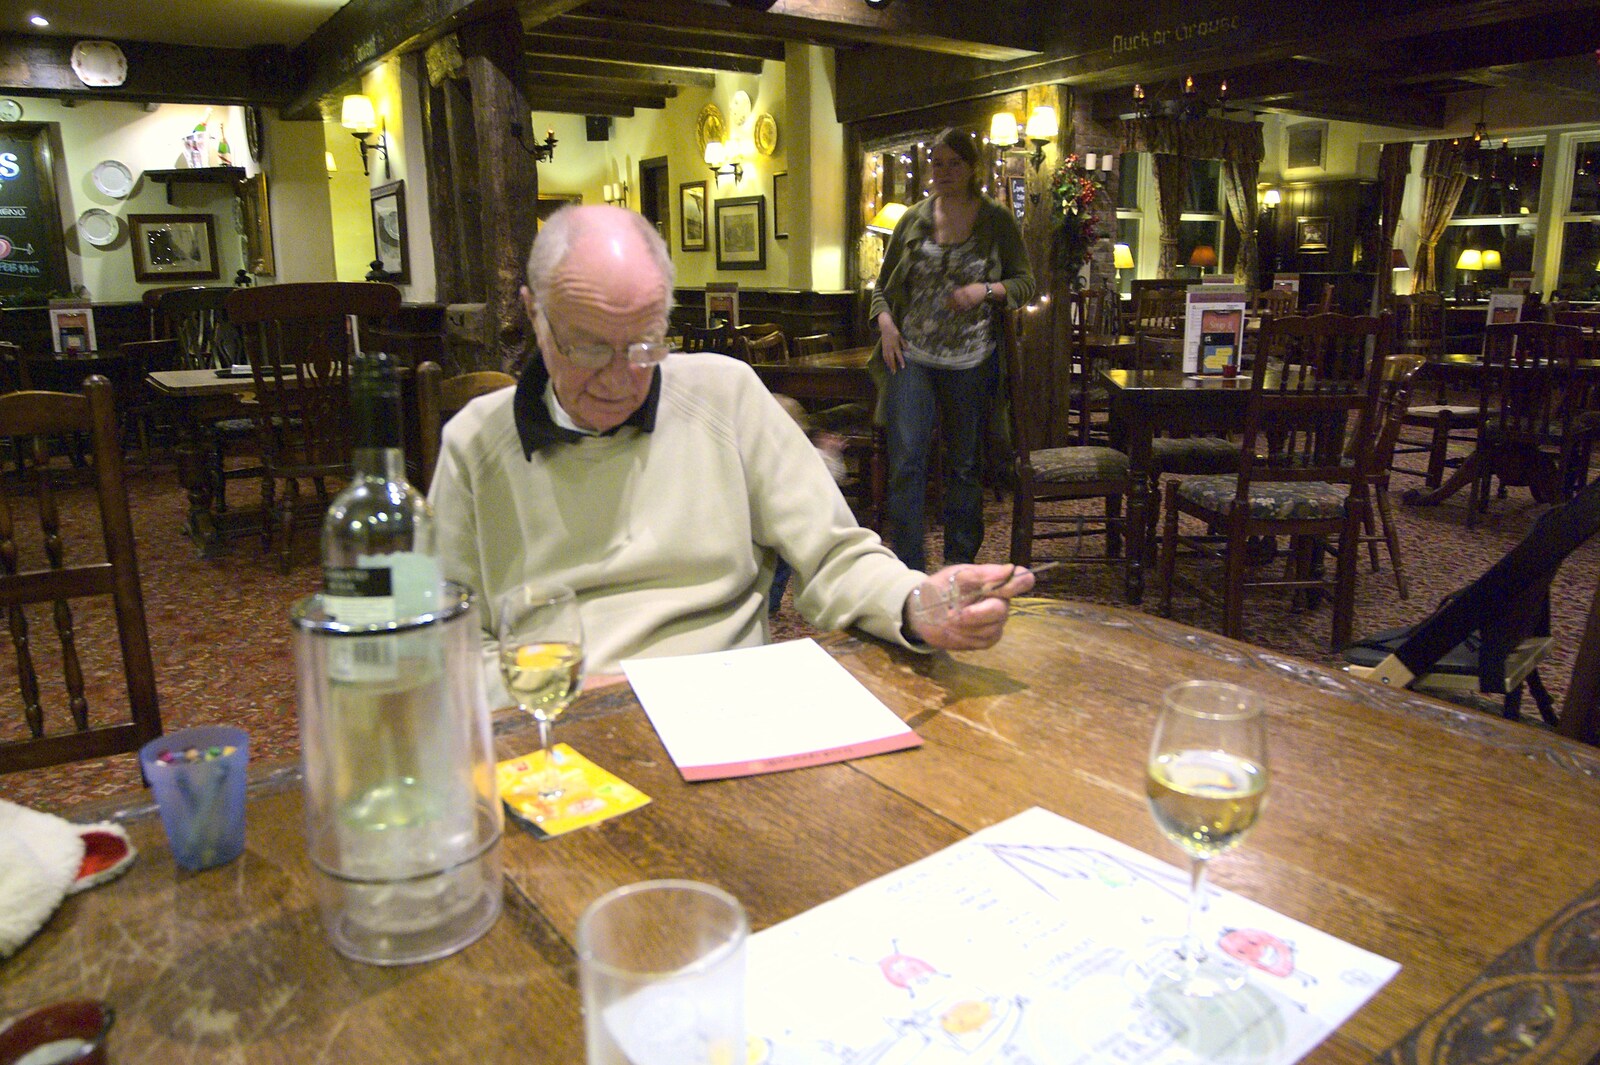 Grandad scopes the menu out from Christmas at Number 19, Blackrock, County Dublin, Ireland - 25th December 2009